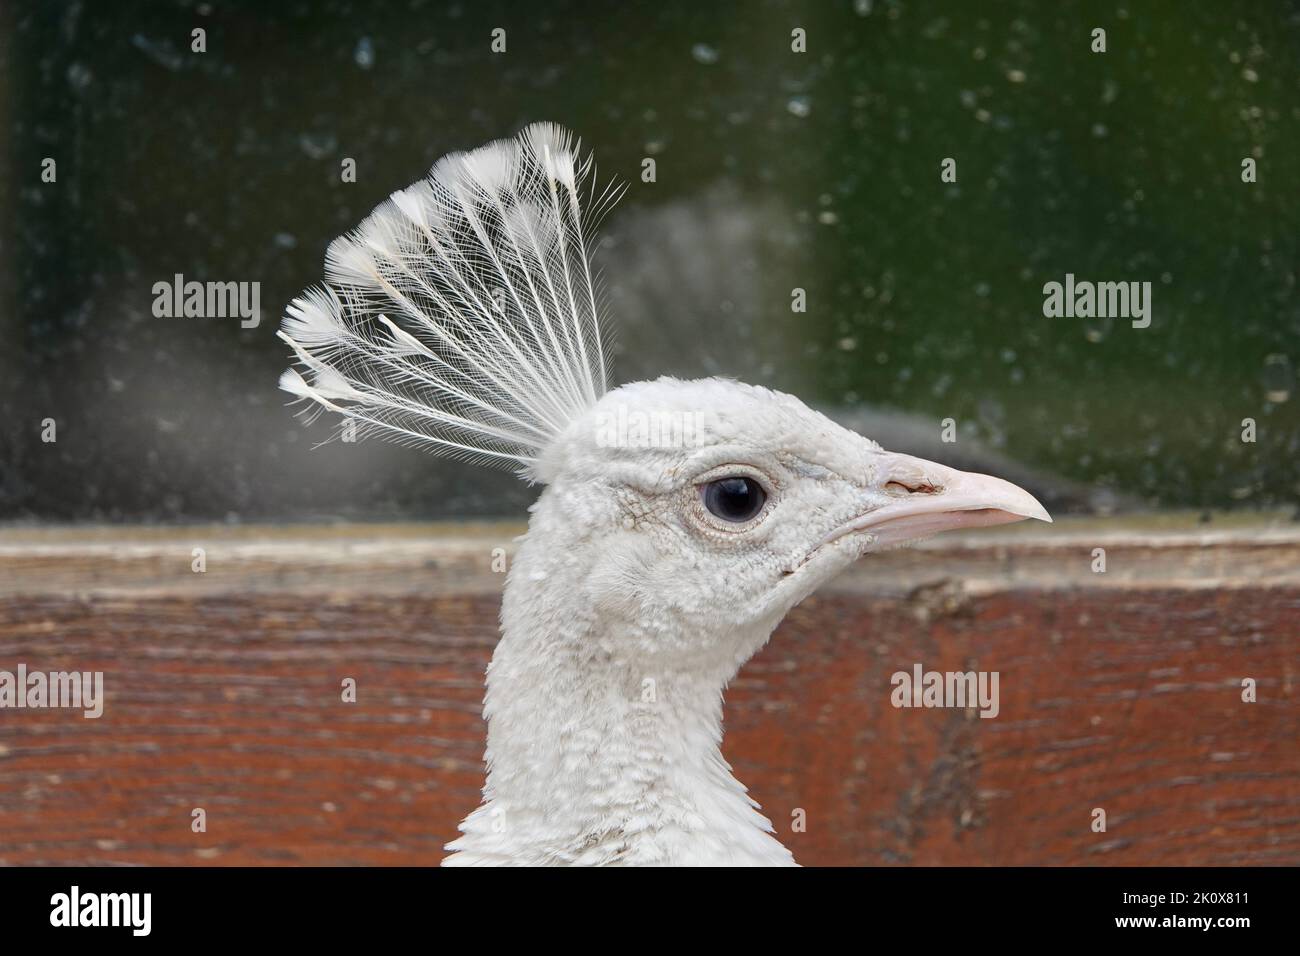 A close-up shot of the head of beautiful male white common peafowl looking into camera Stock Photo